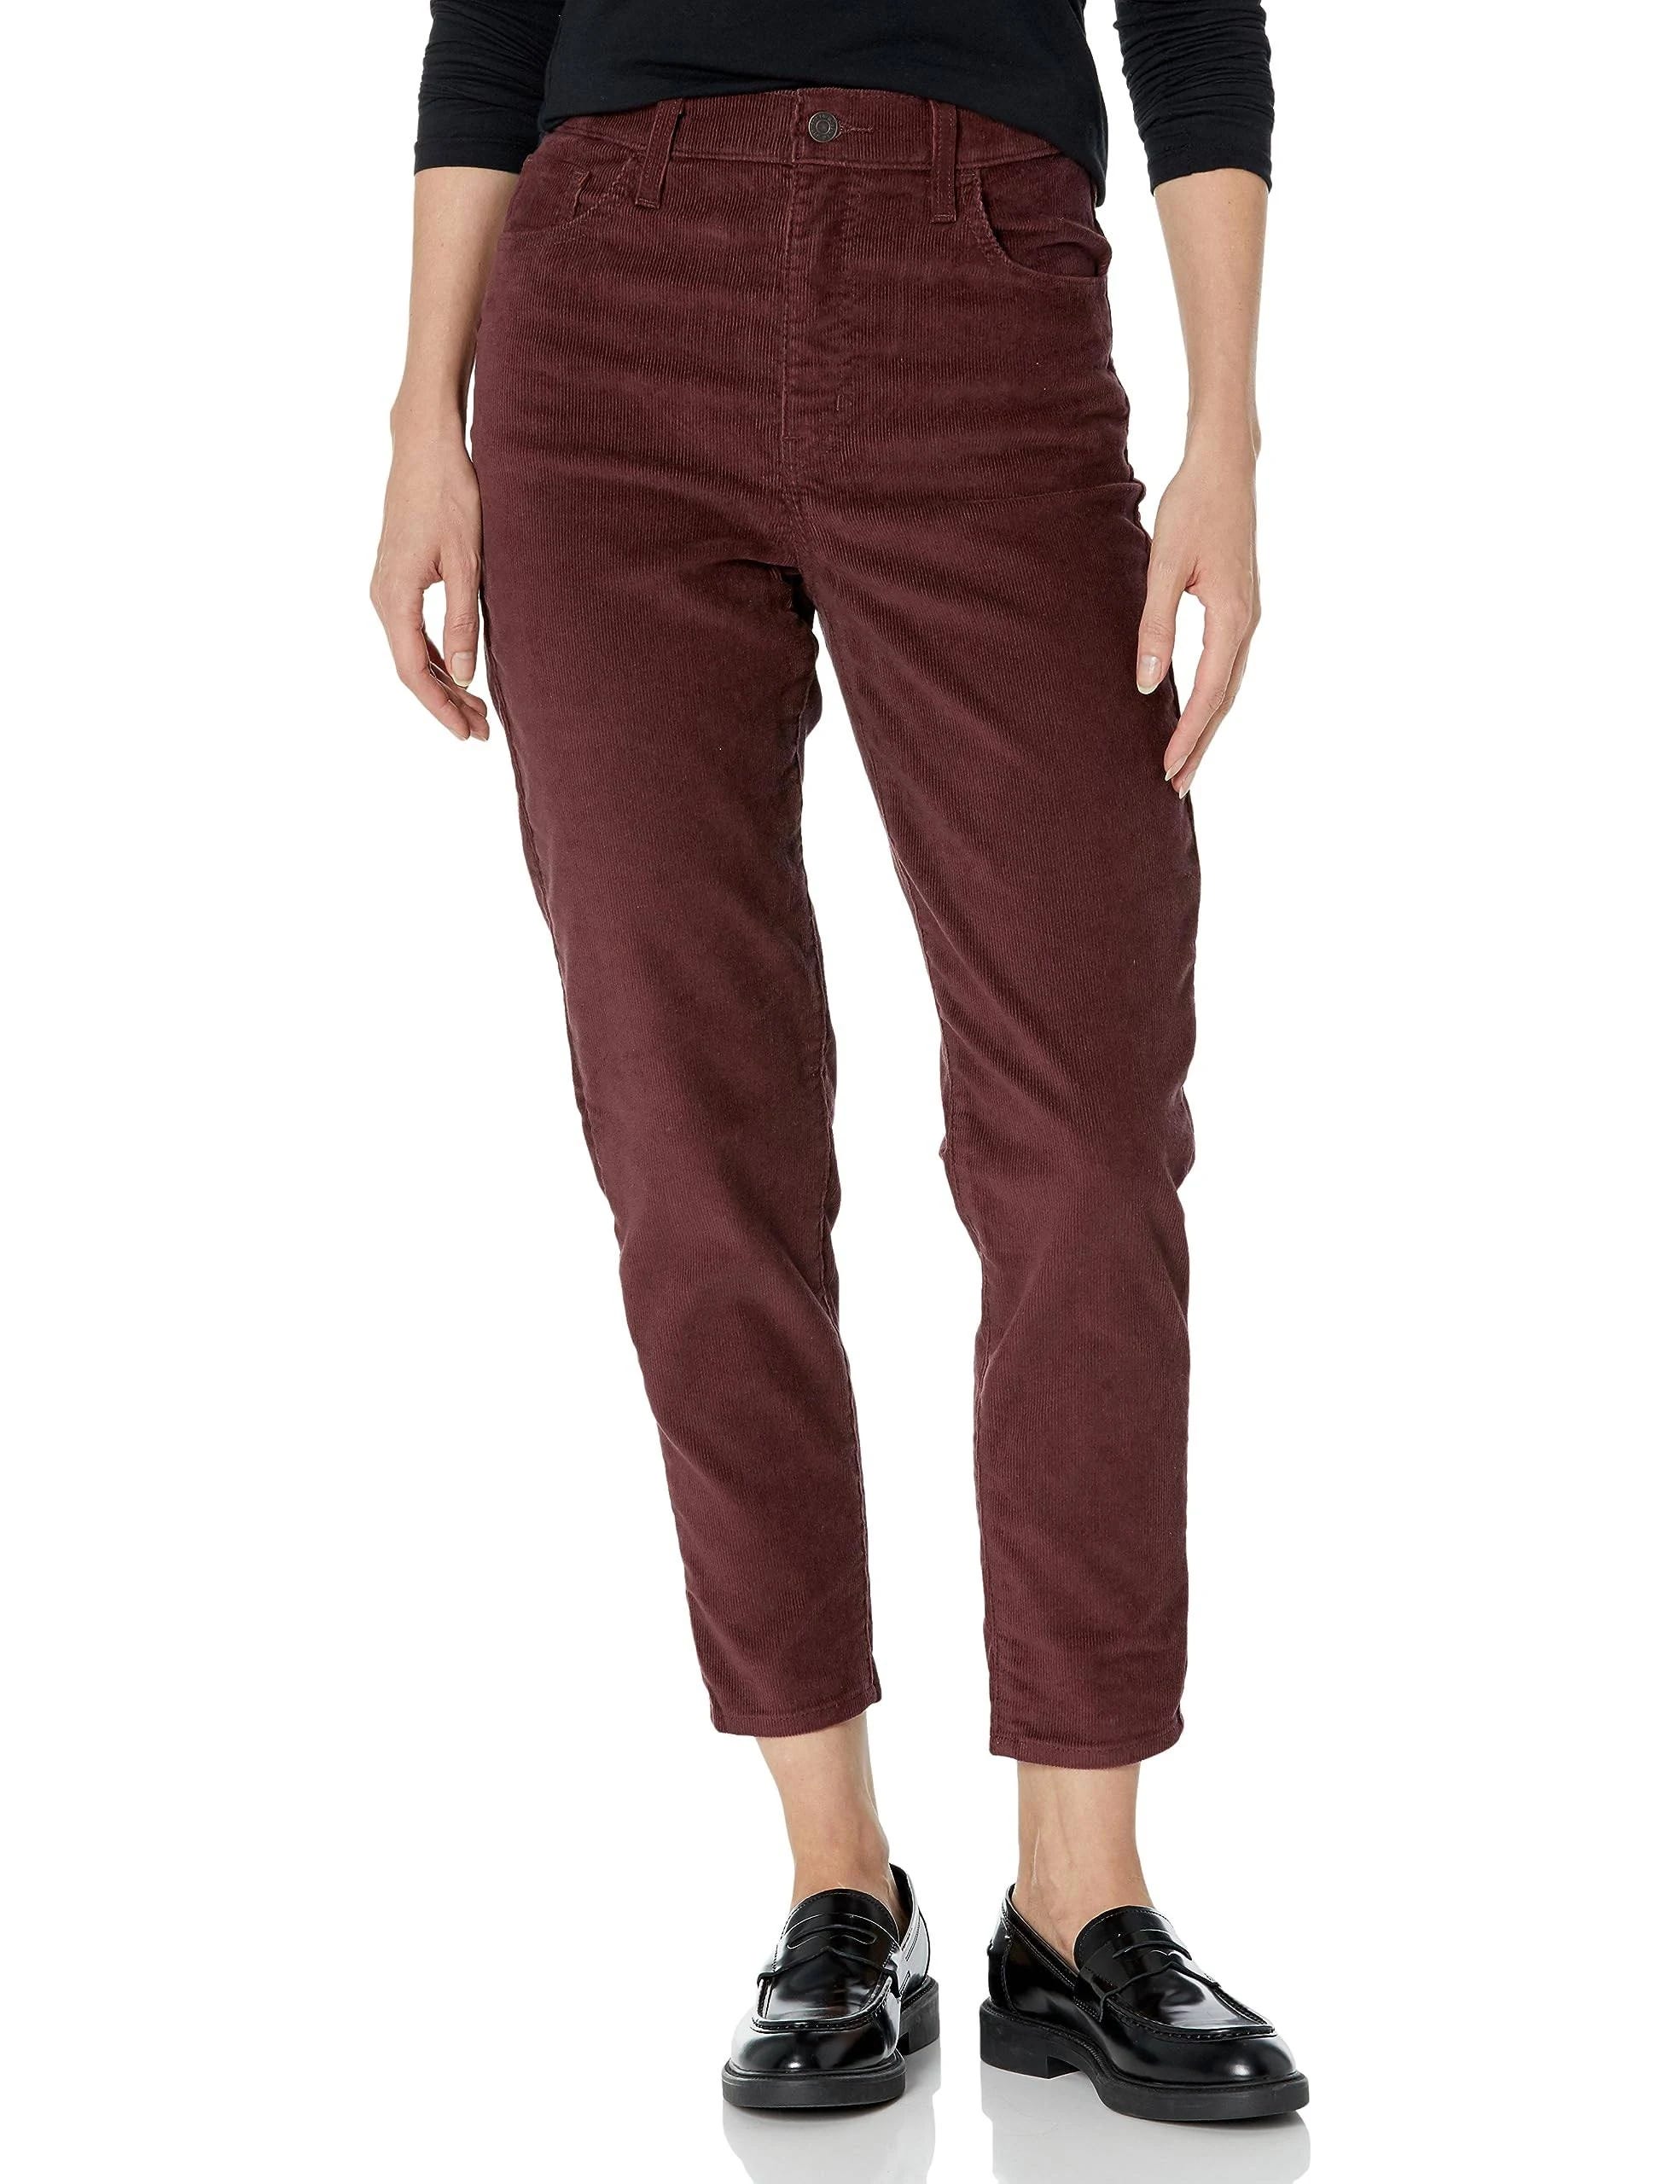 Retro-Inspired High-Waisted Mom Jeans: Decadent Chocolate Shade | Image